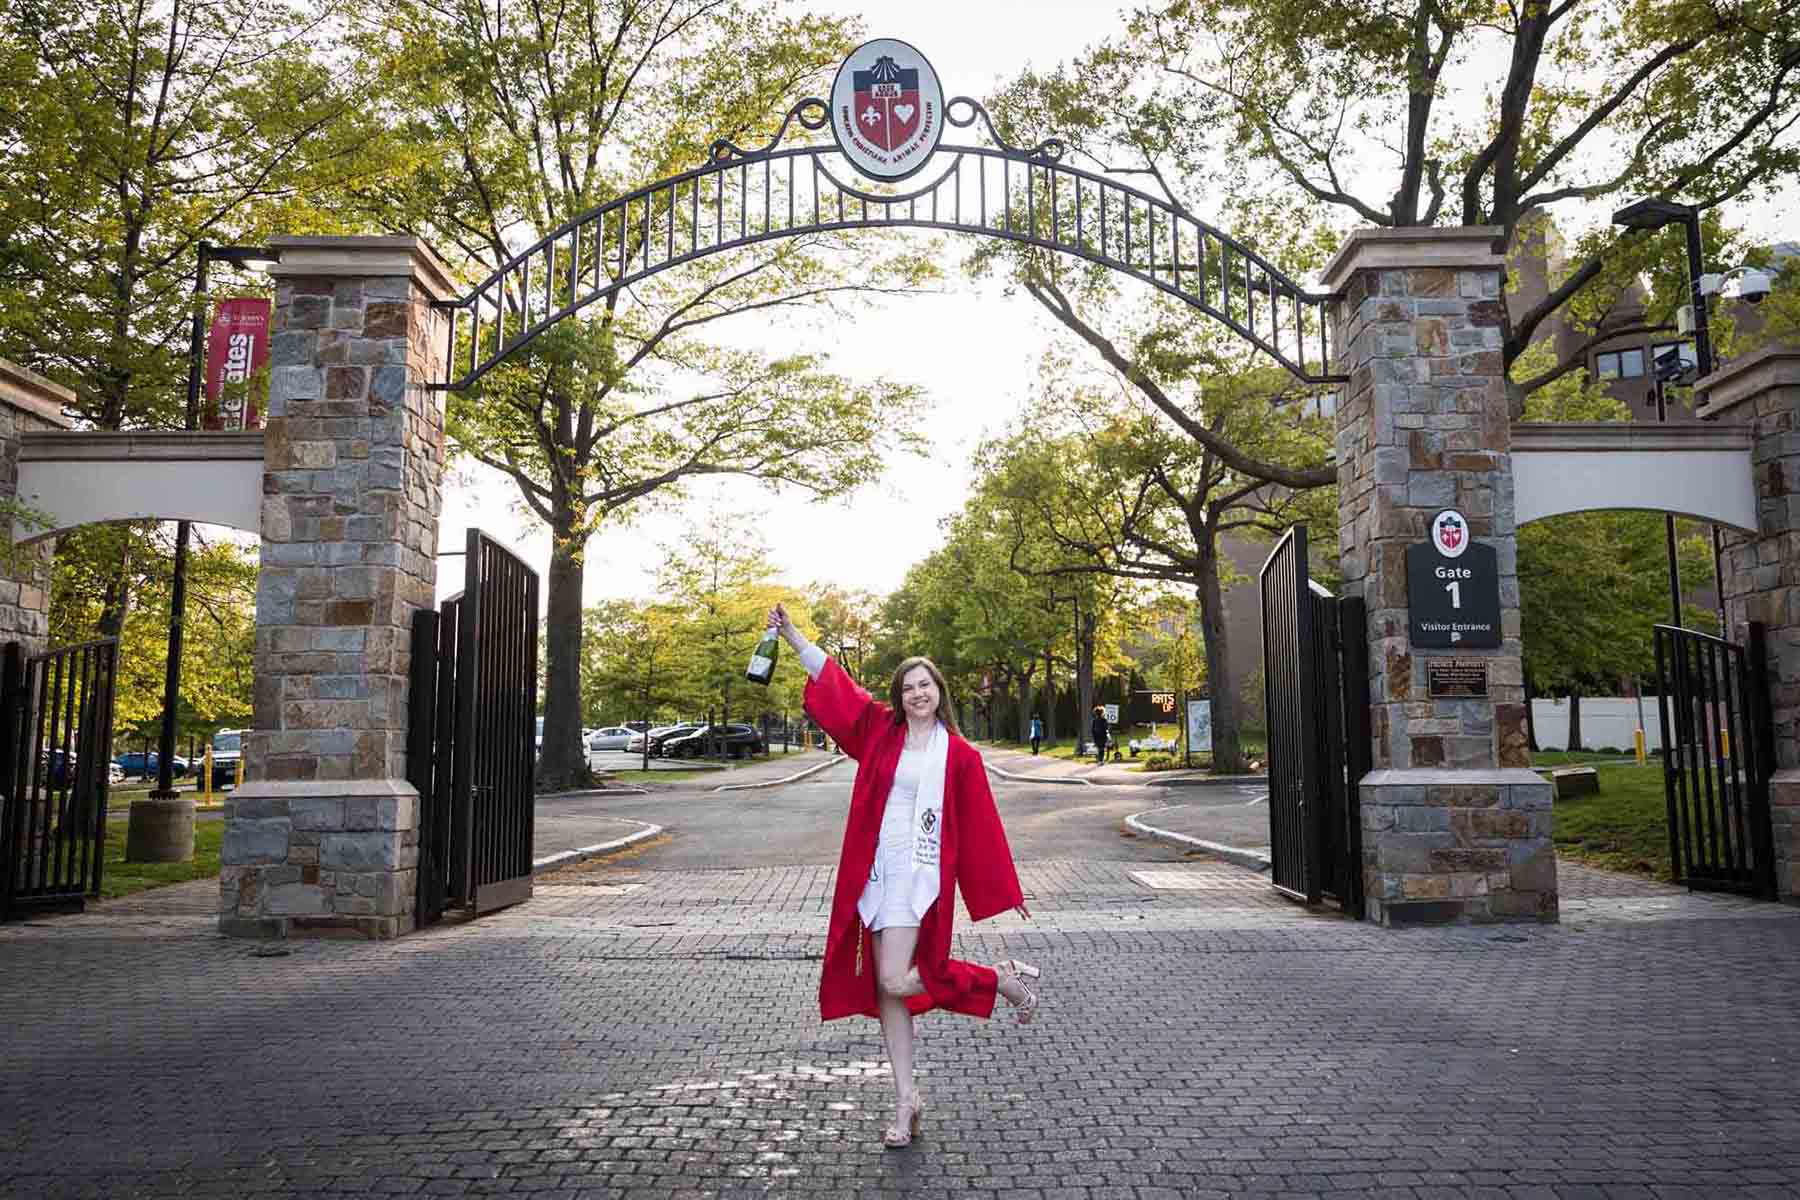 Female graduate wearing red robe and white sash holding champagne bottle under gate during a St. John’s University graduate portrait session